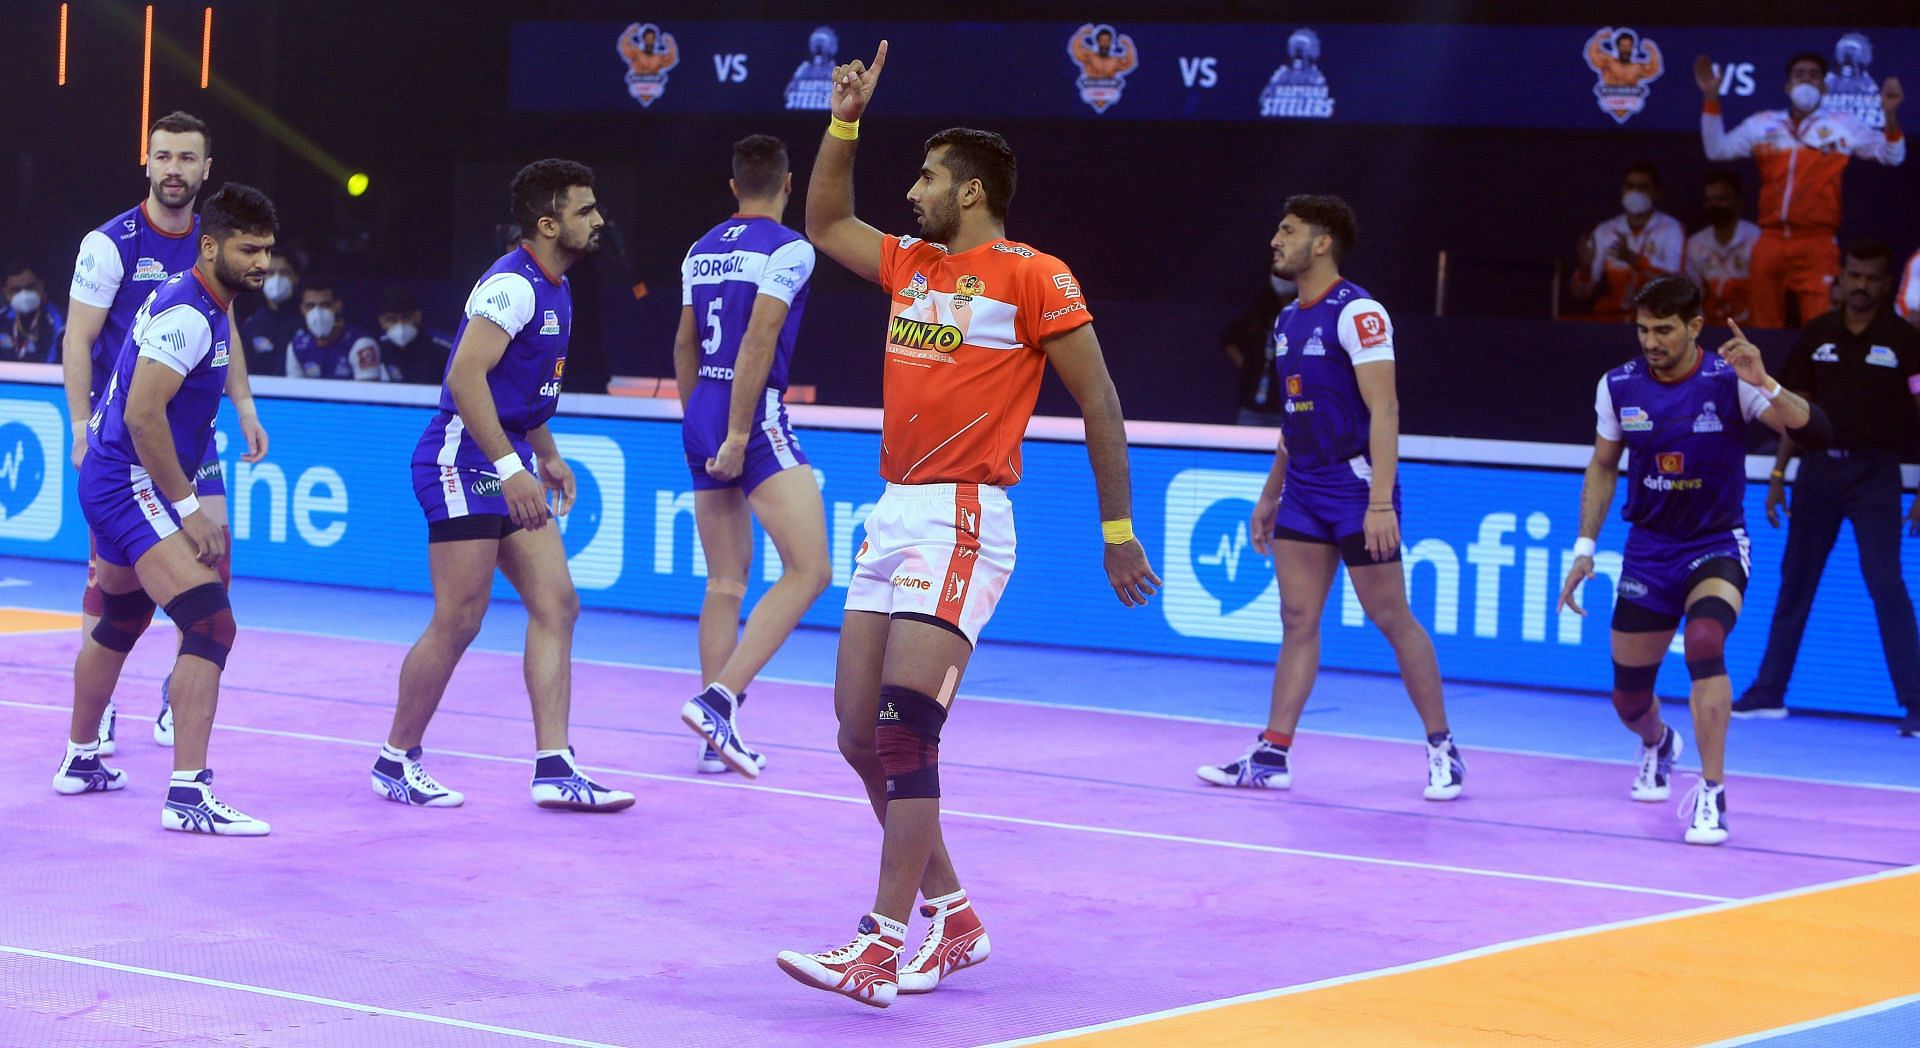 Rakesh in action for the Gujarat Giants against the Haryana Steelers - Image Courtesy: Gujarat Giants Twitter